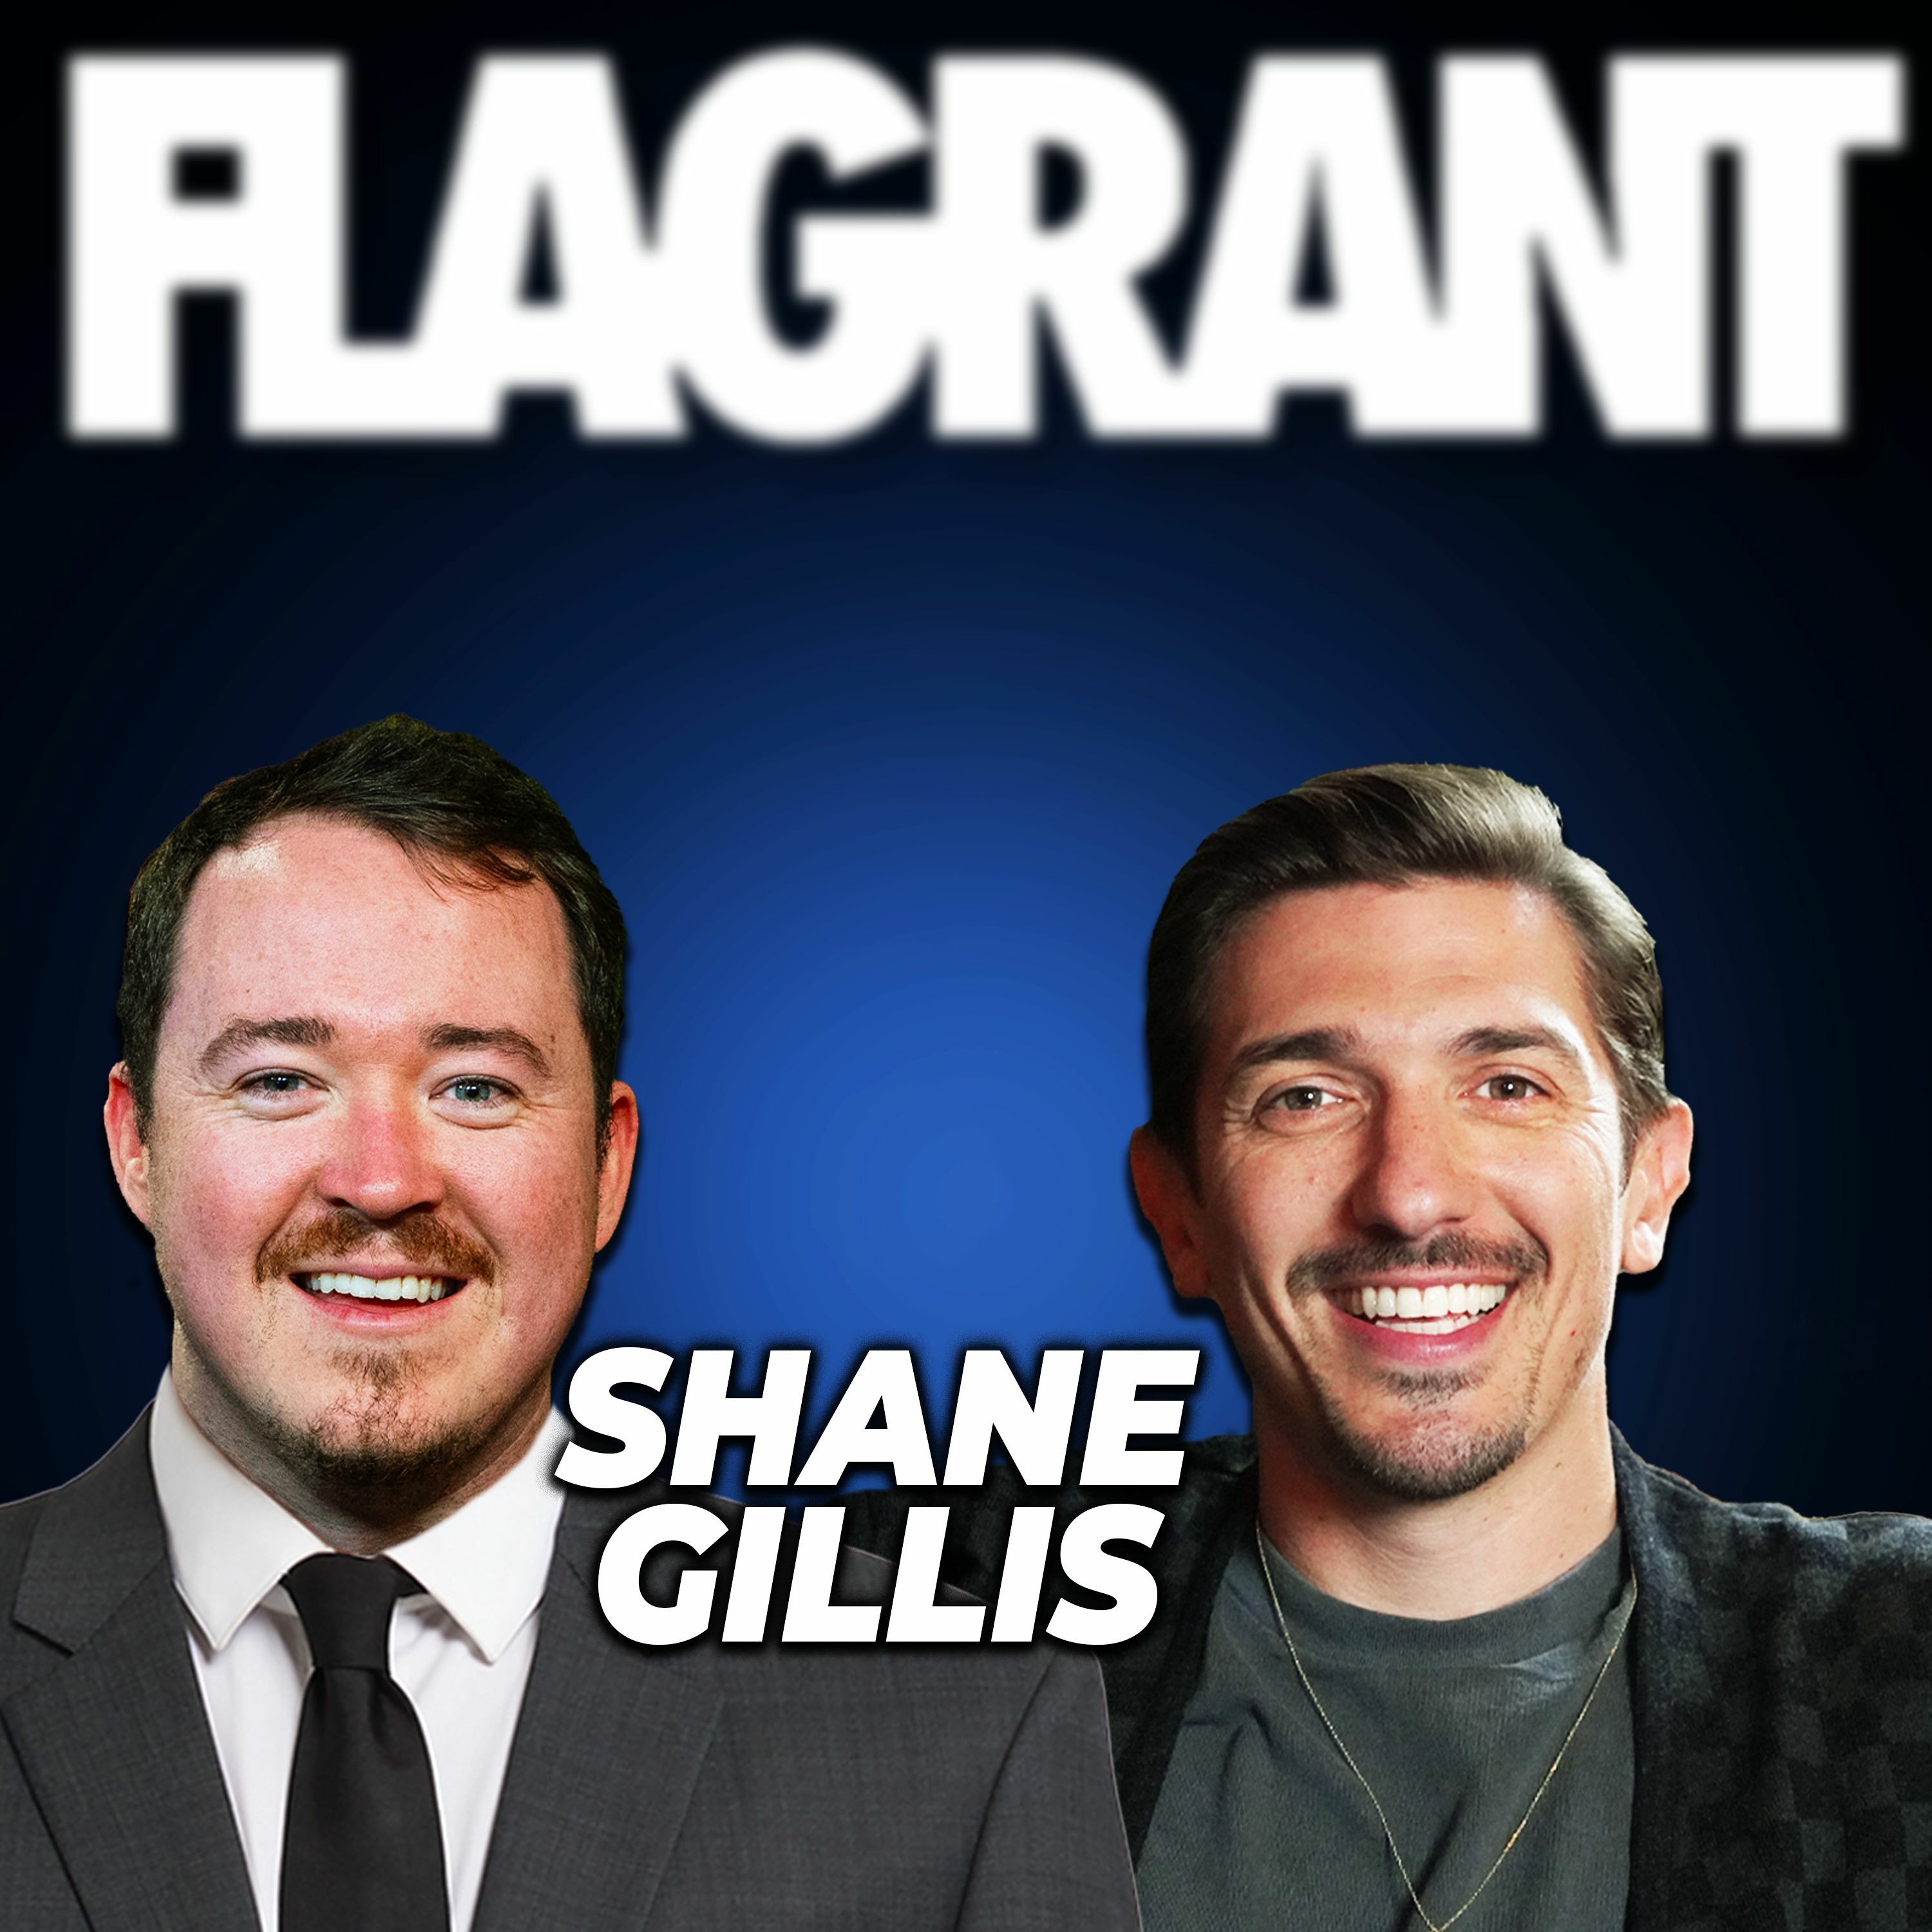 Shane Gillis Replaces Trevor Noah As Daily Show Host by Andrew Schulz's